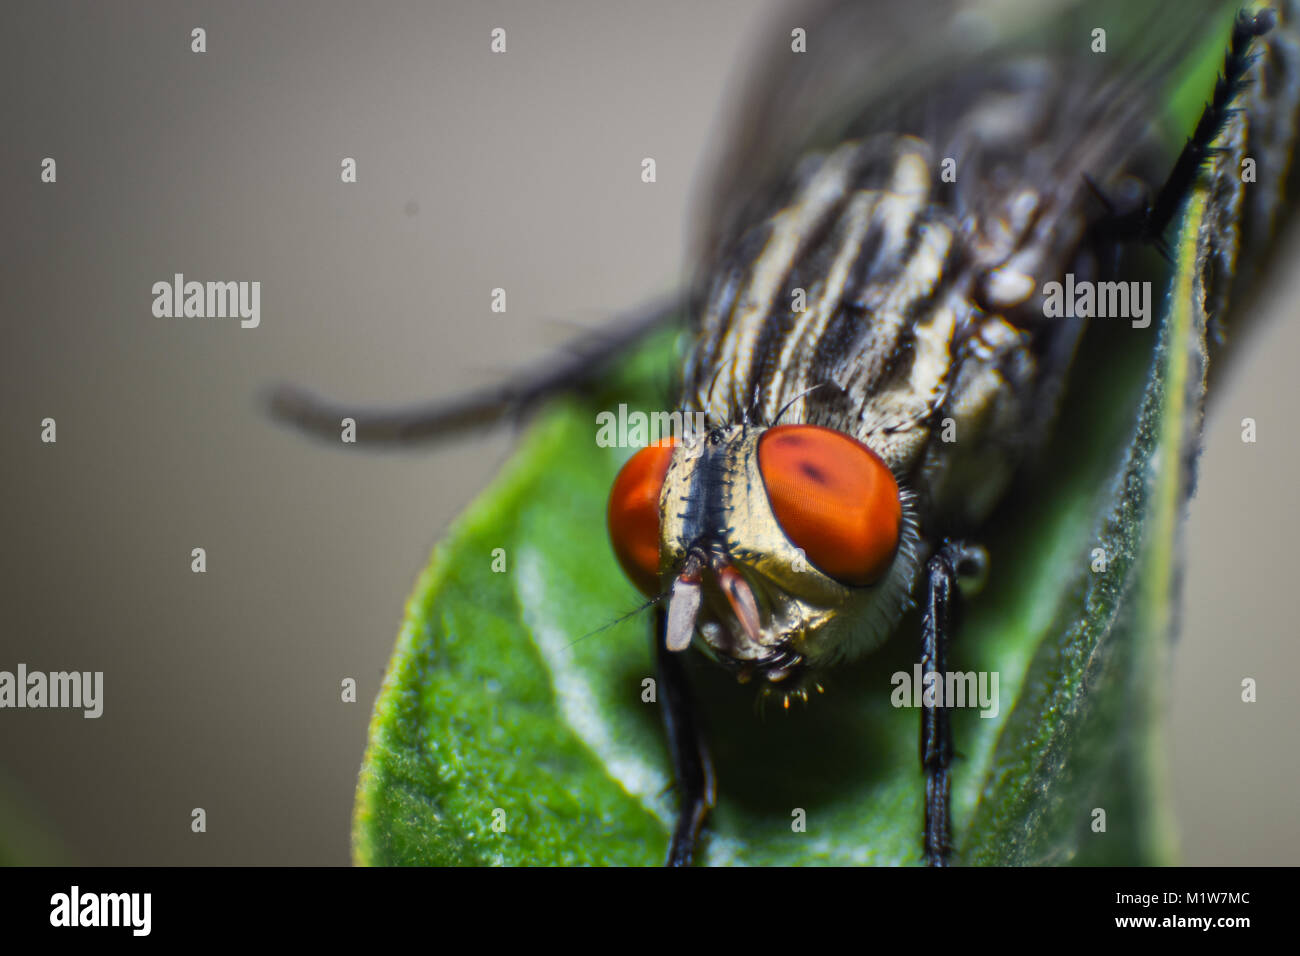 Insects world by Macro Stock Photo